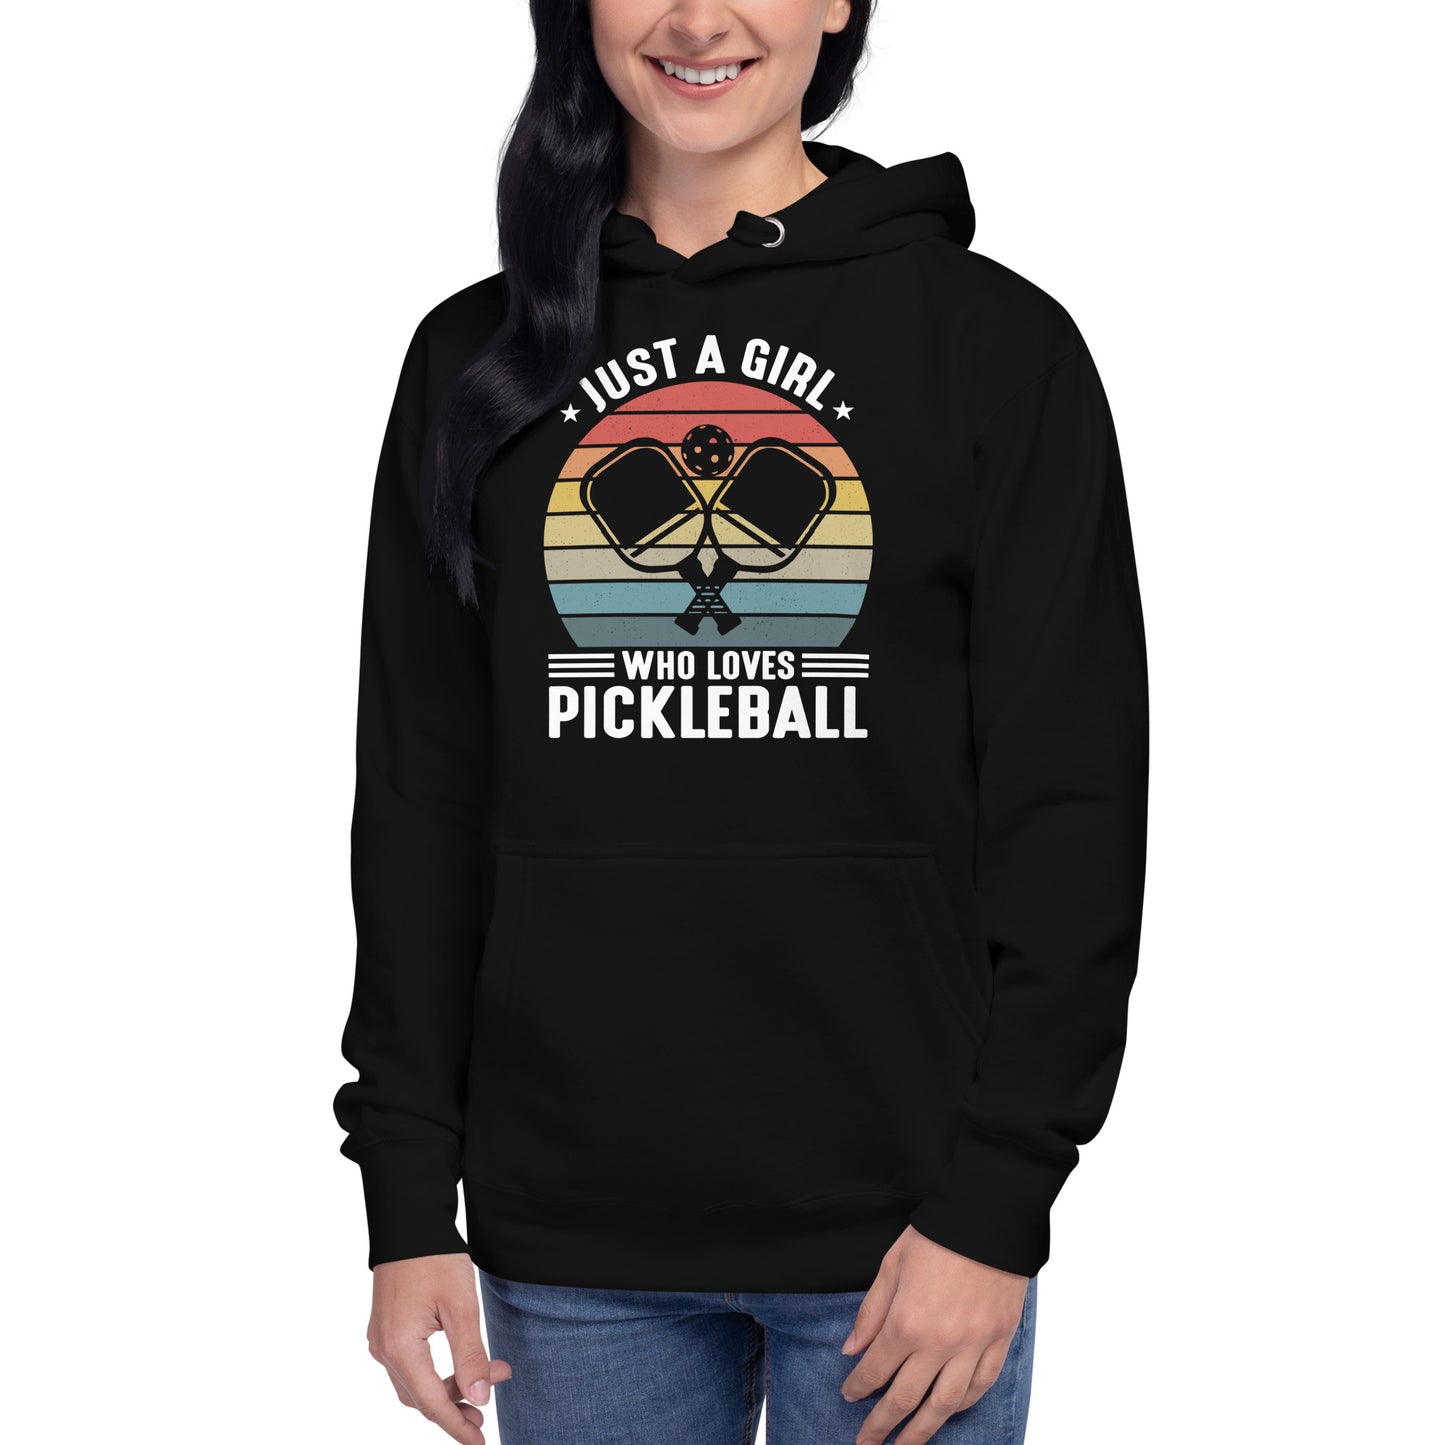 Just a Girl Who Loves Pickleball Hoodie